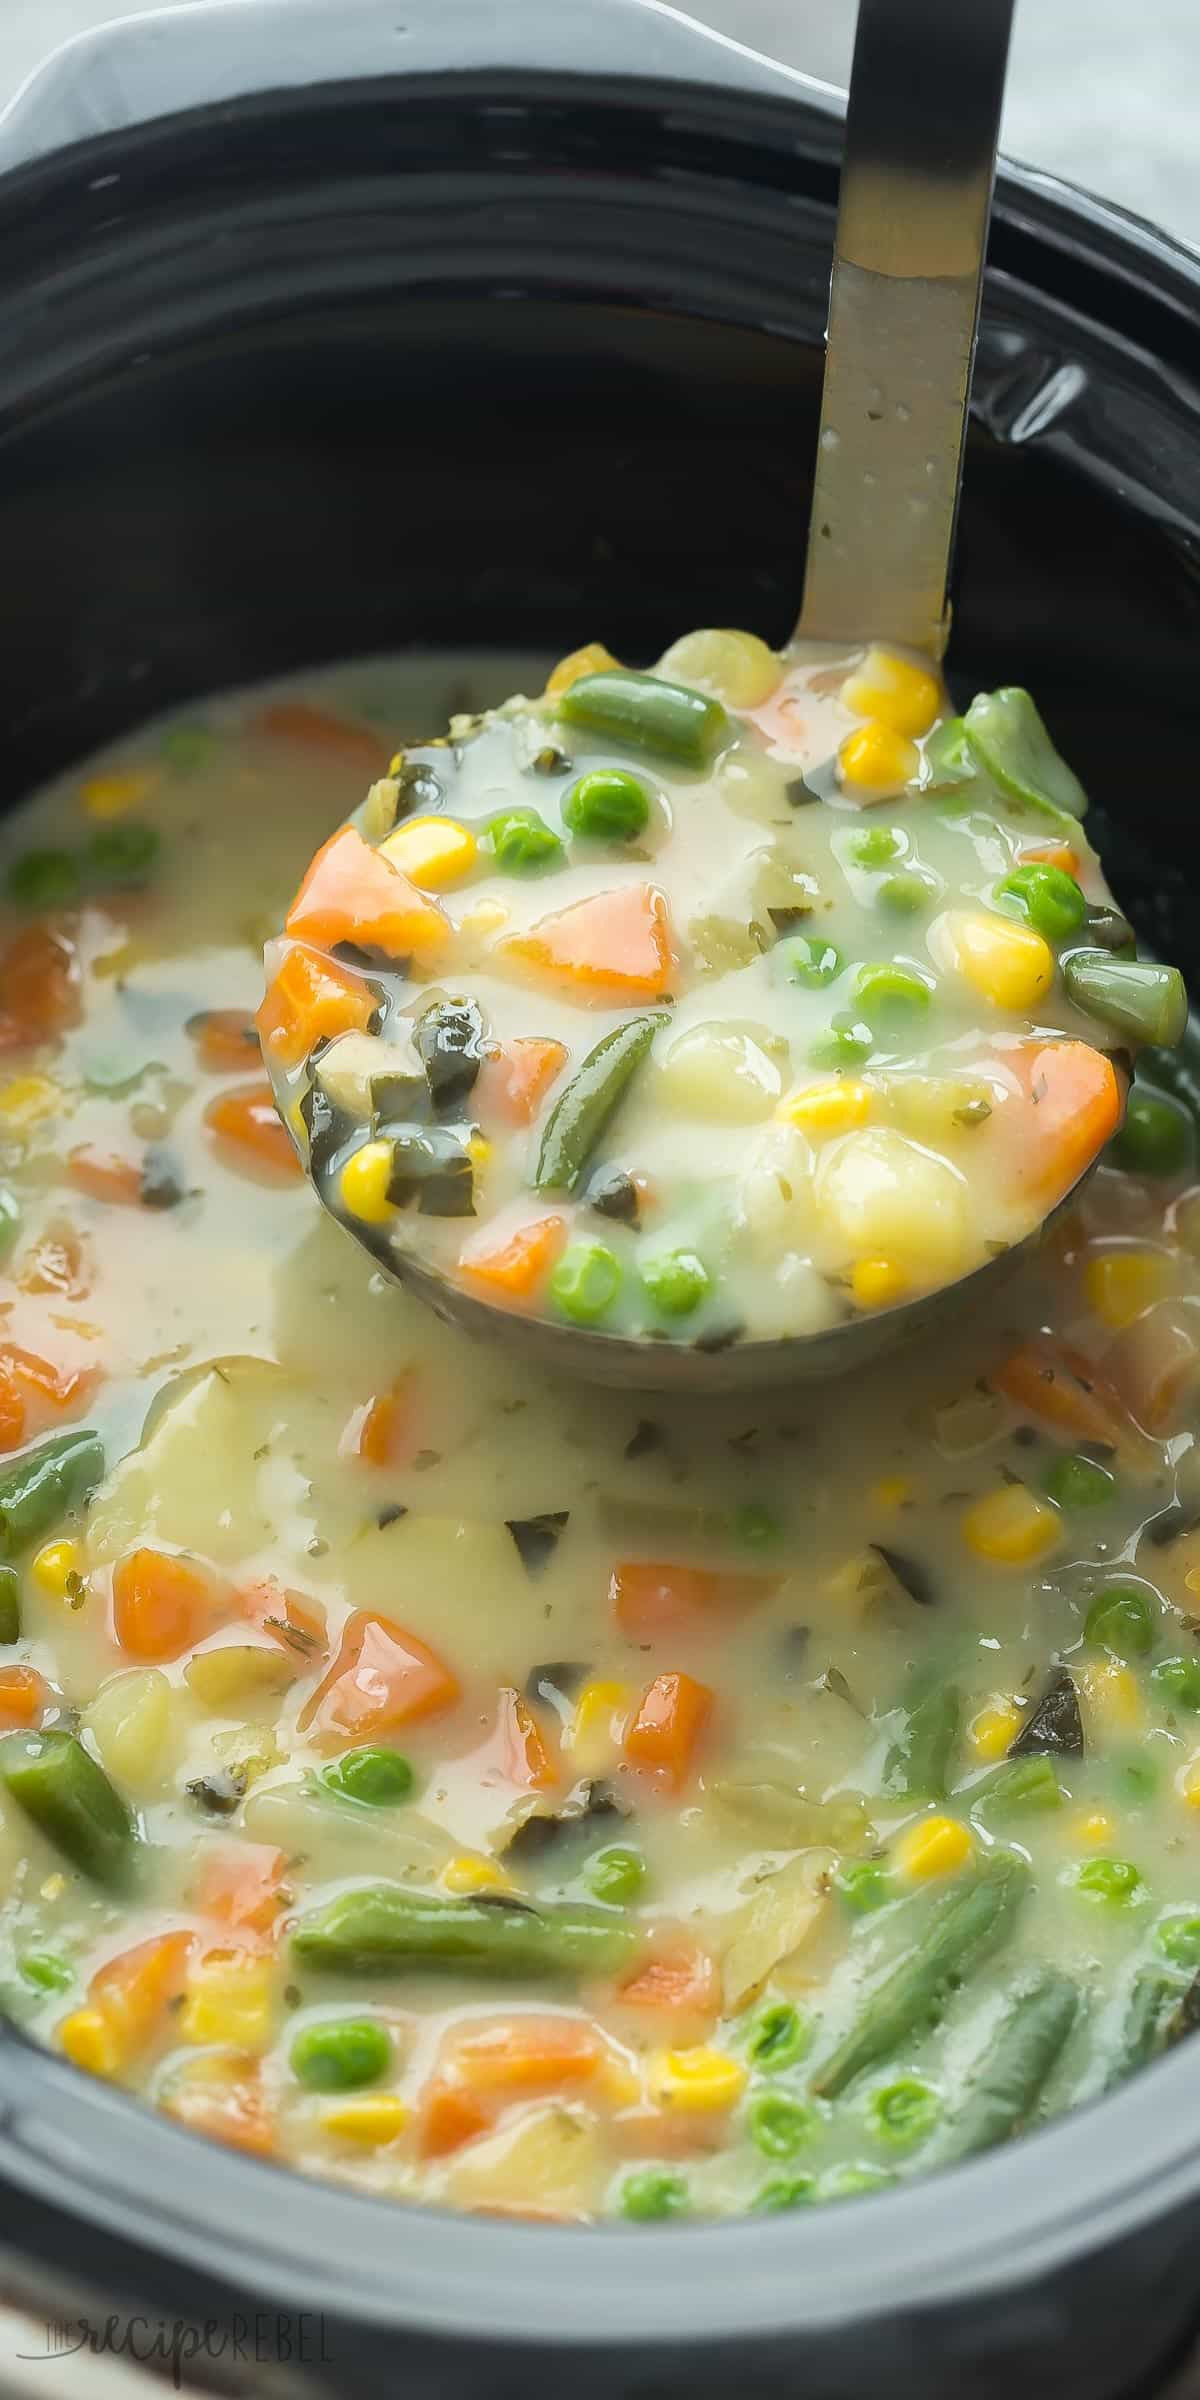 Vegetarian Crockpot Soup Recipes Slow Cooker Creamy Ve able Soup with RECIPE VIDEO